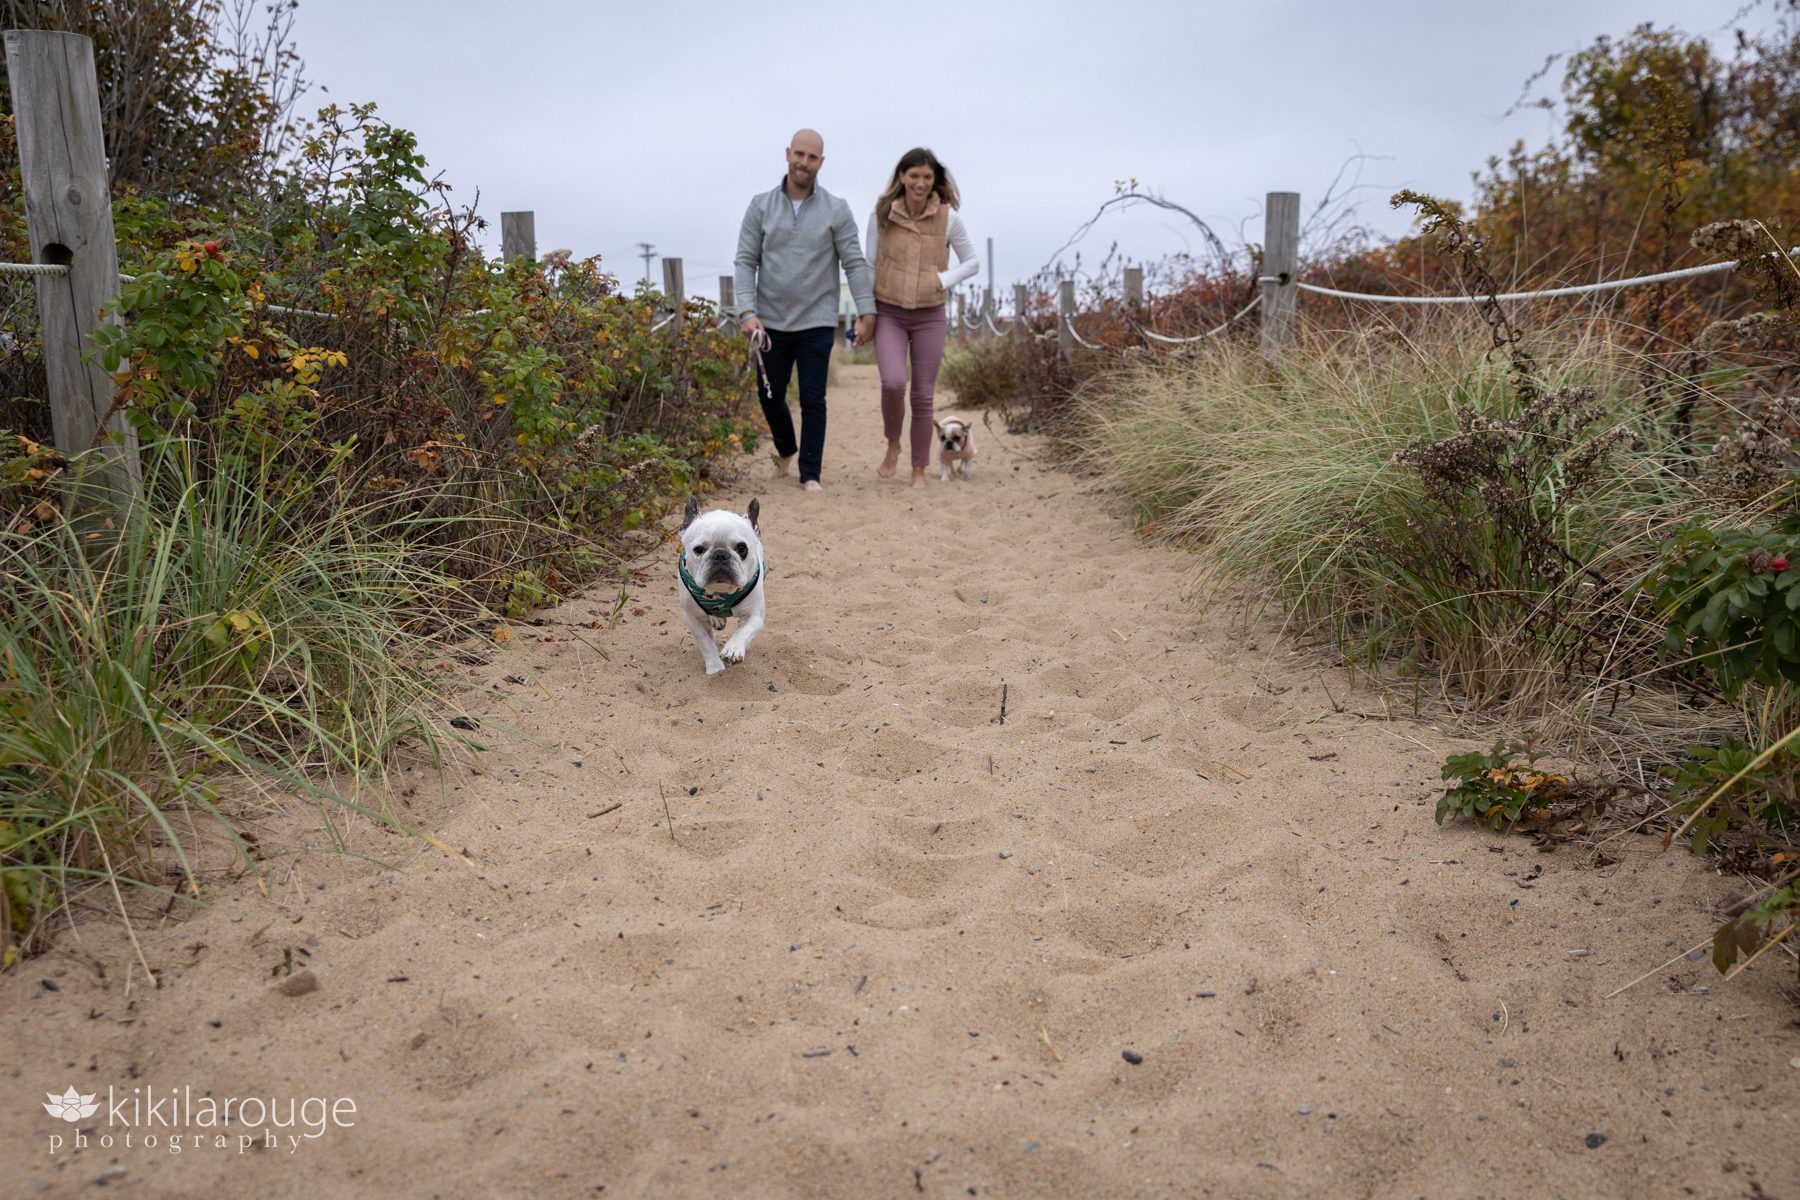 White French Bulldog running down Plum Island beach dune path with owners in the background